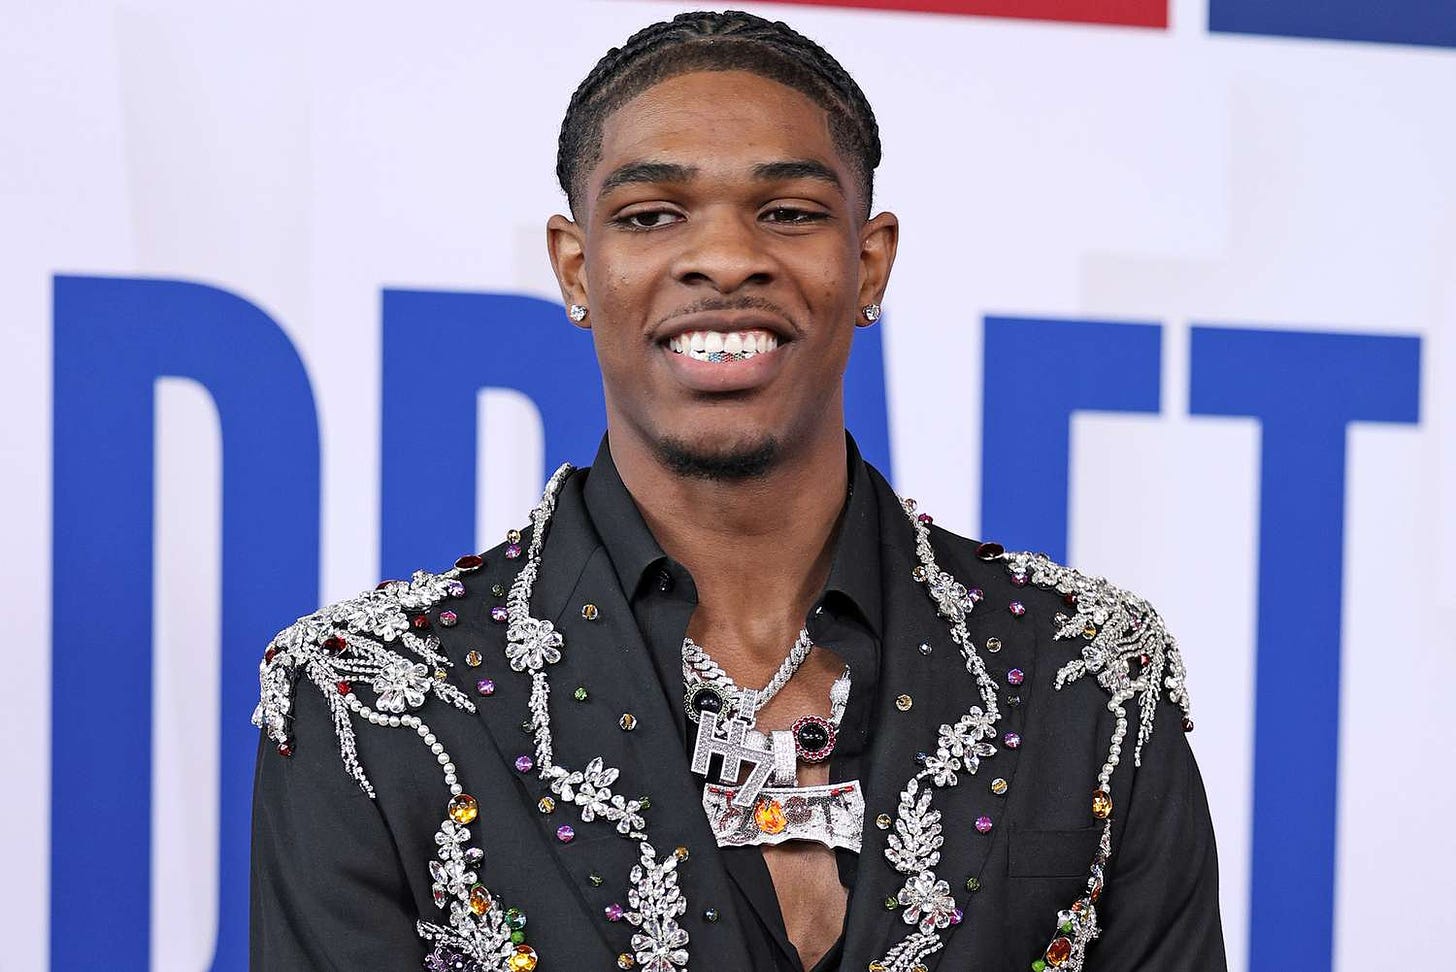 Scoot Henderson's NBA Draft Outfit Was a Tribute to His Family (Exclusive)